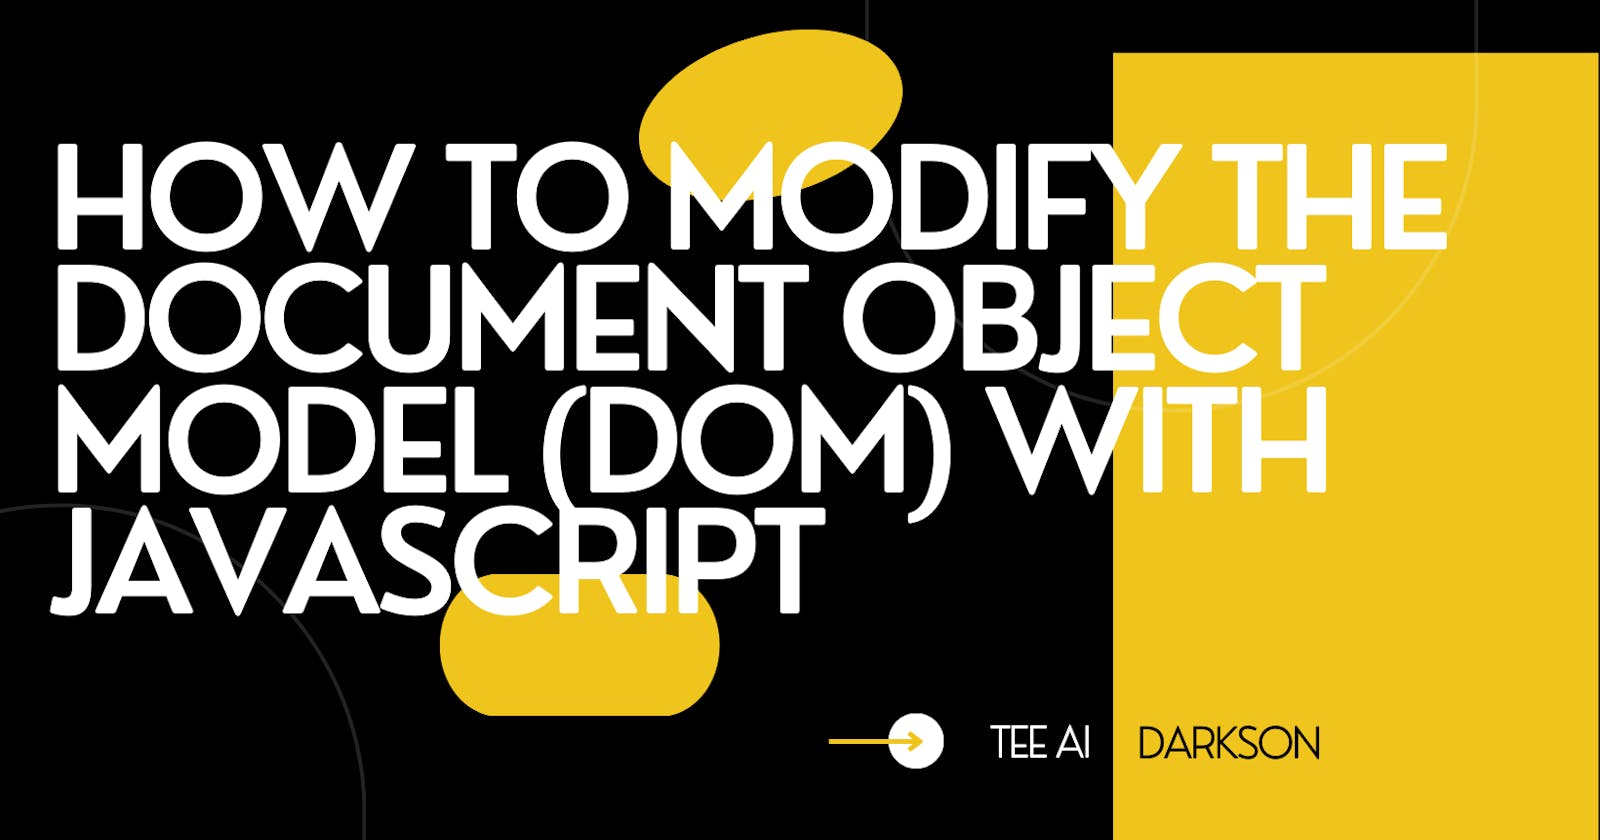 How To Modify The Document Object Model (dom) With Javascript